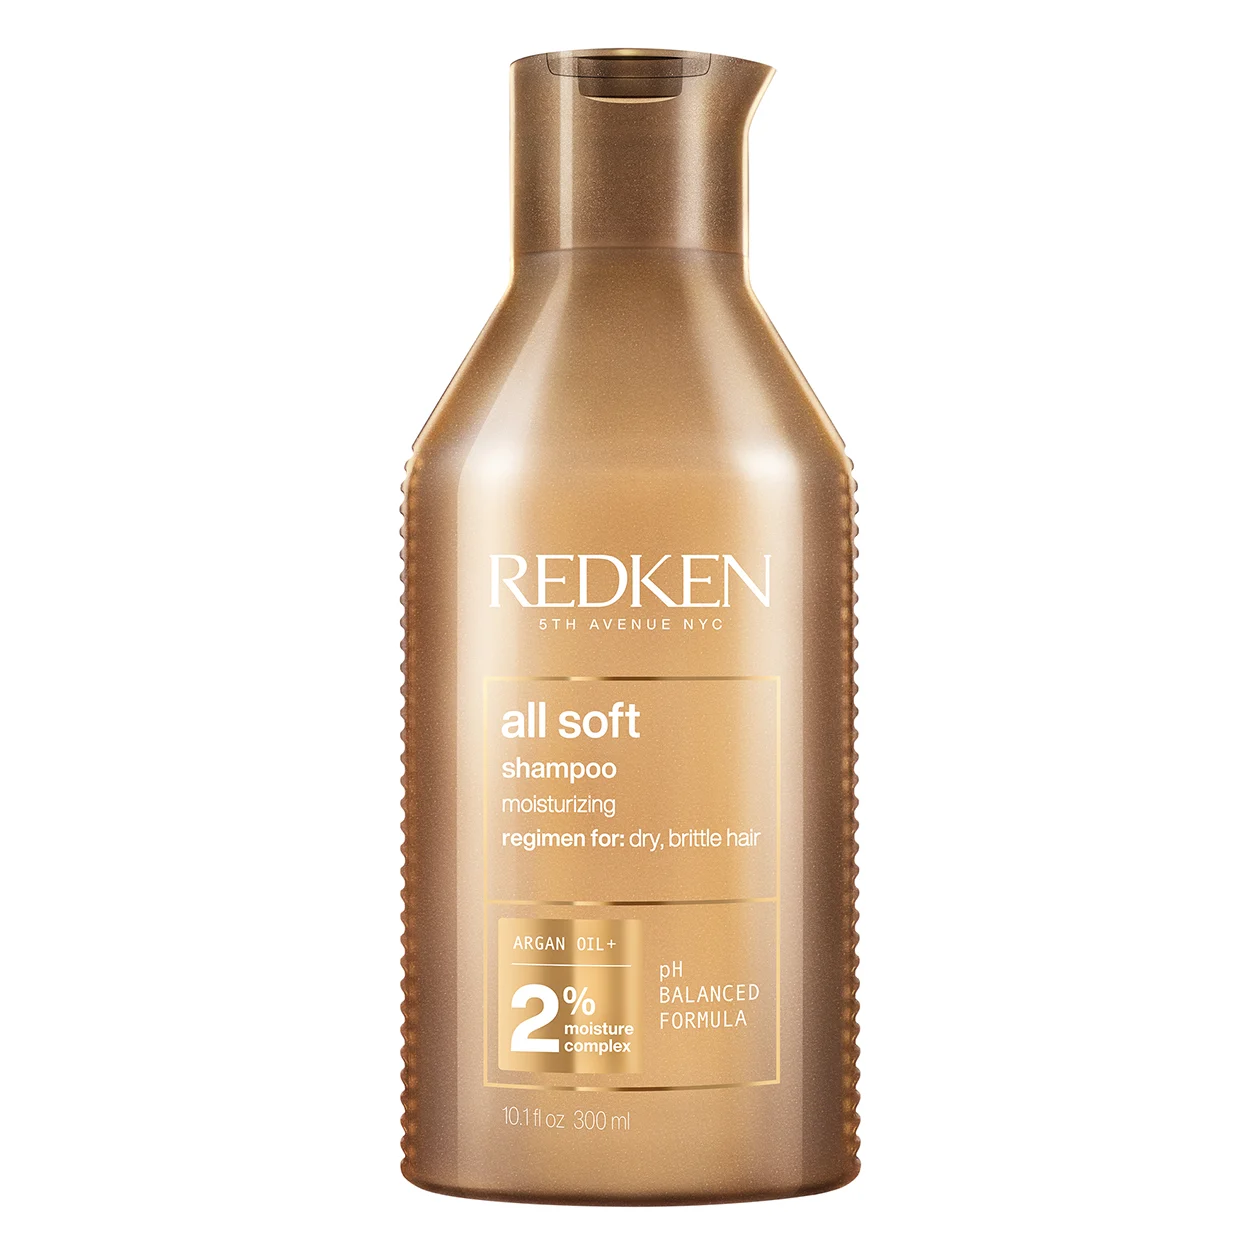 A tied FEMMENORDIC's choice in the Redken vs Pureology shampoo comparison, Redken All Soft Shampoo